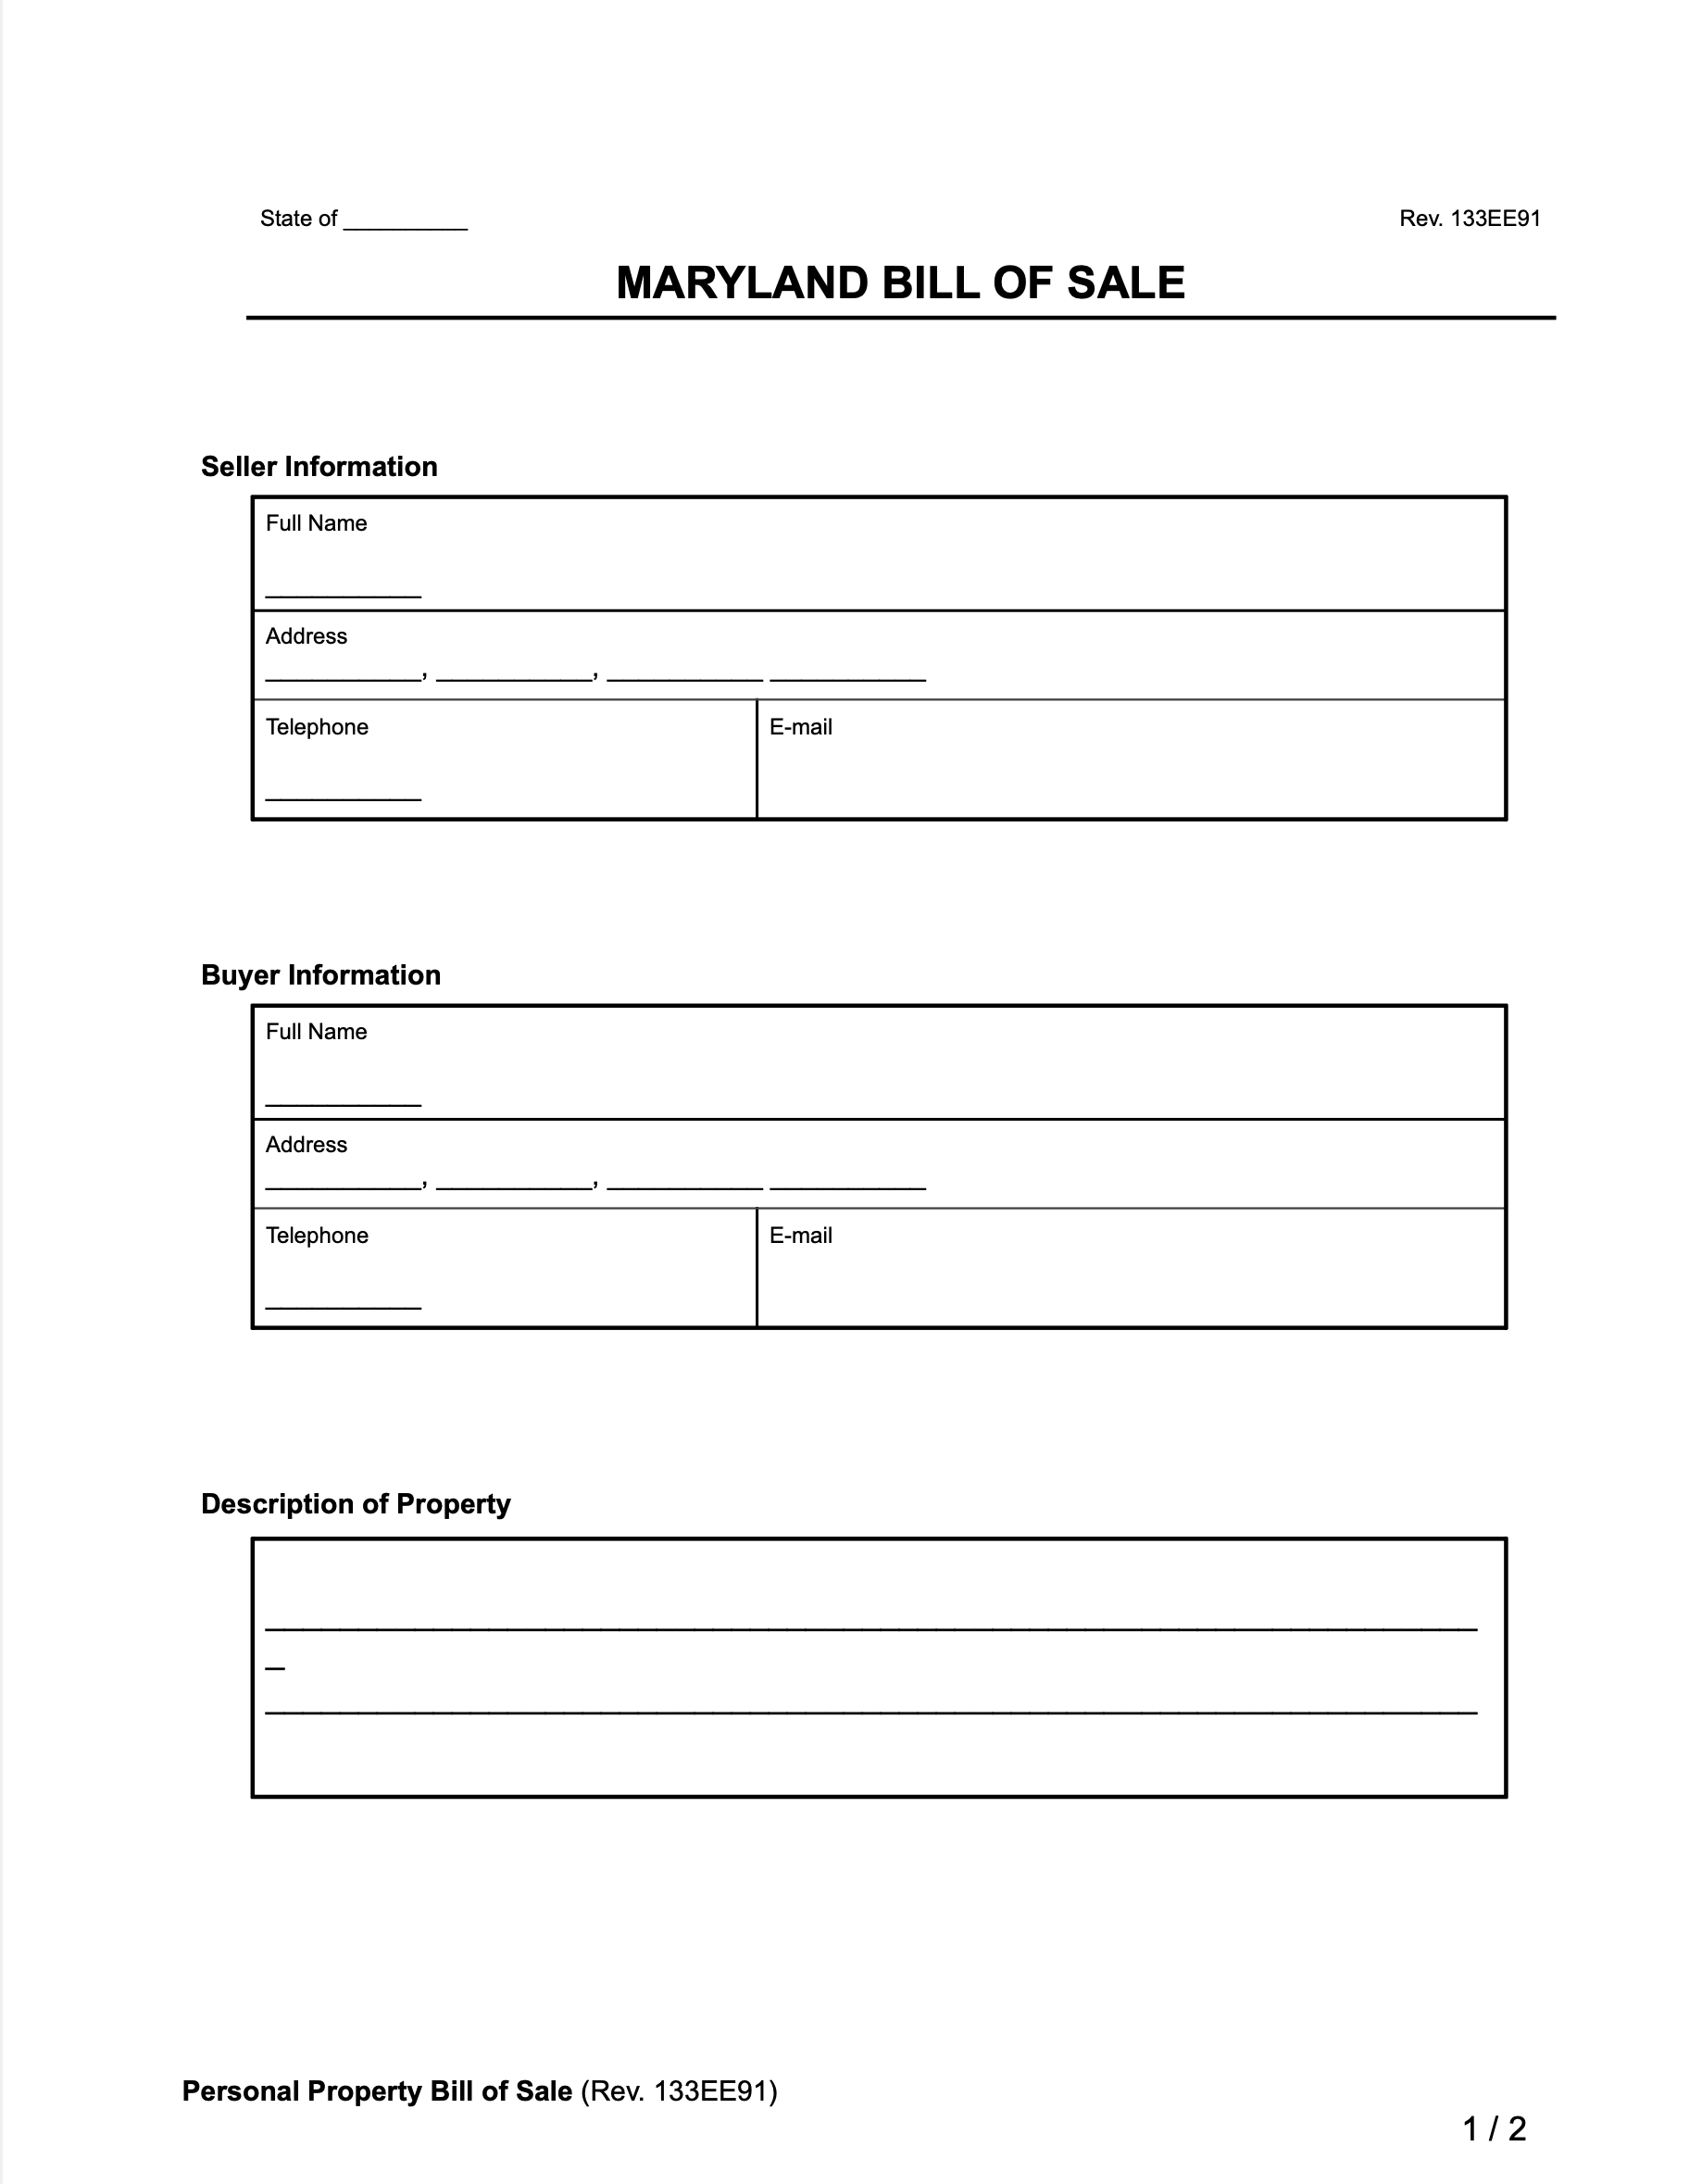 Maryland bill of sale form